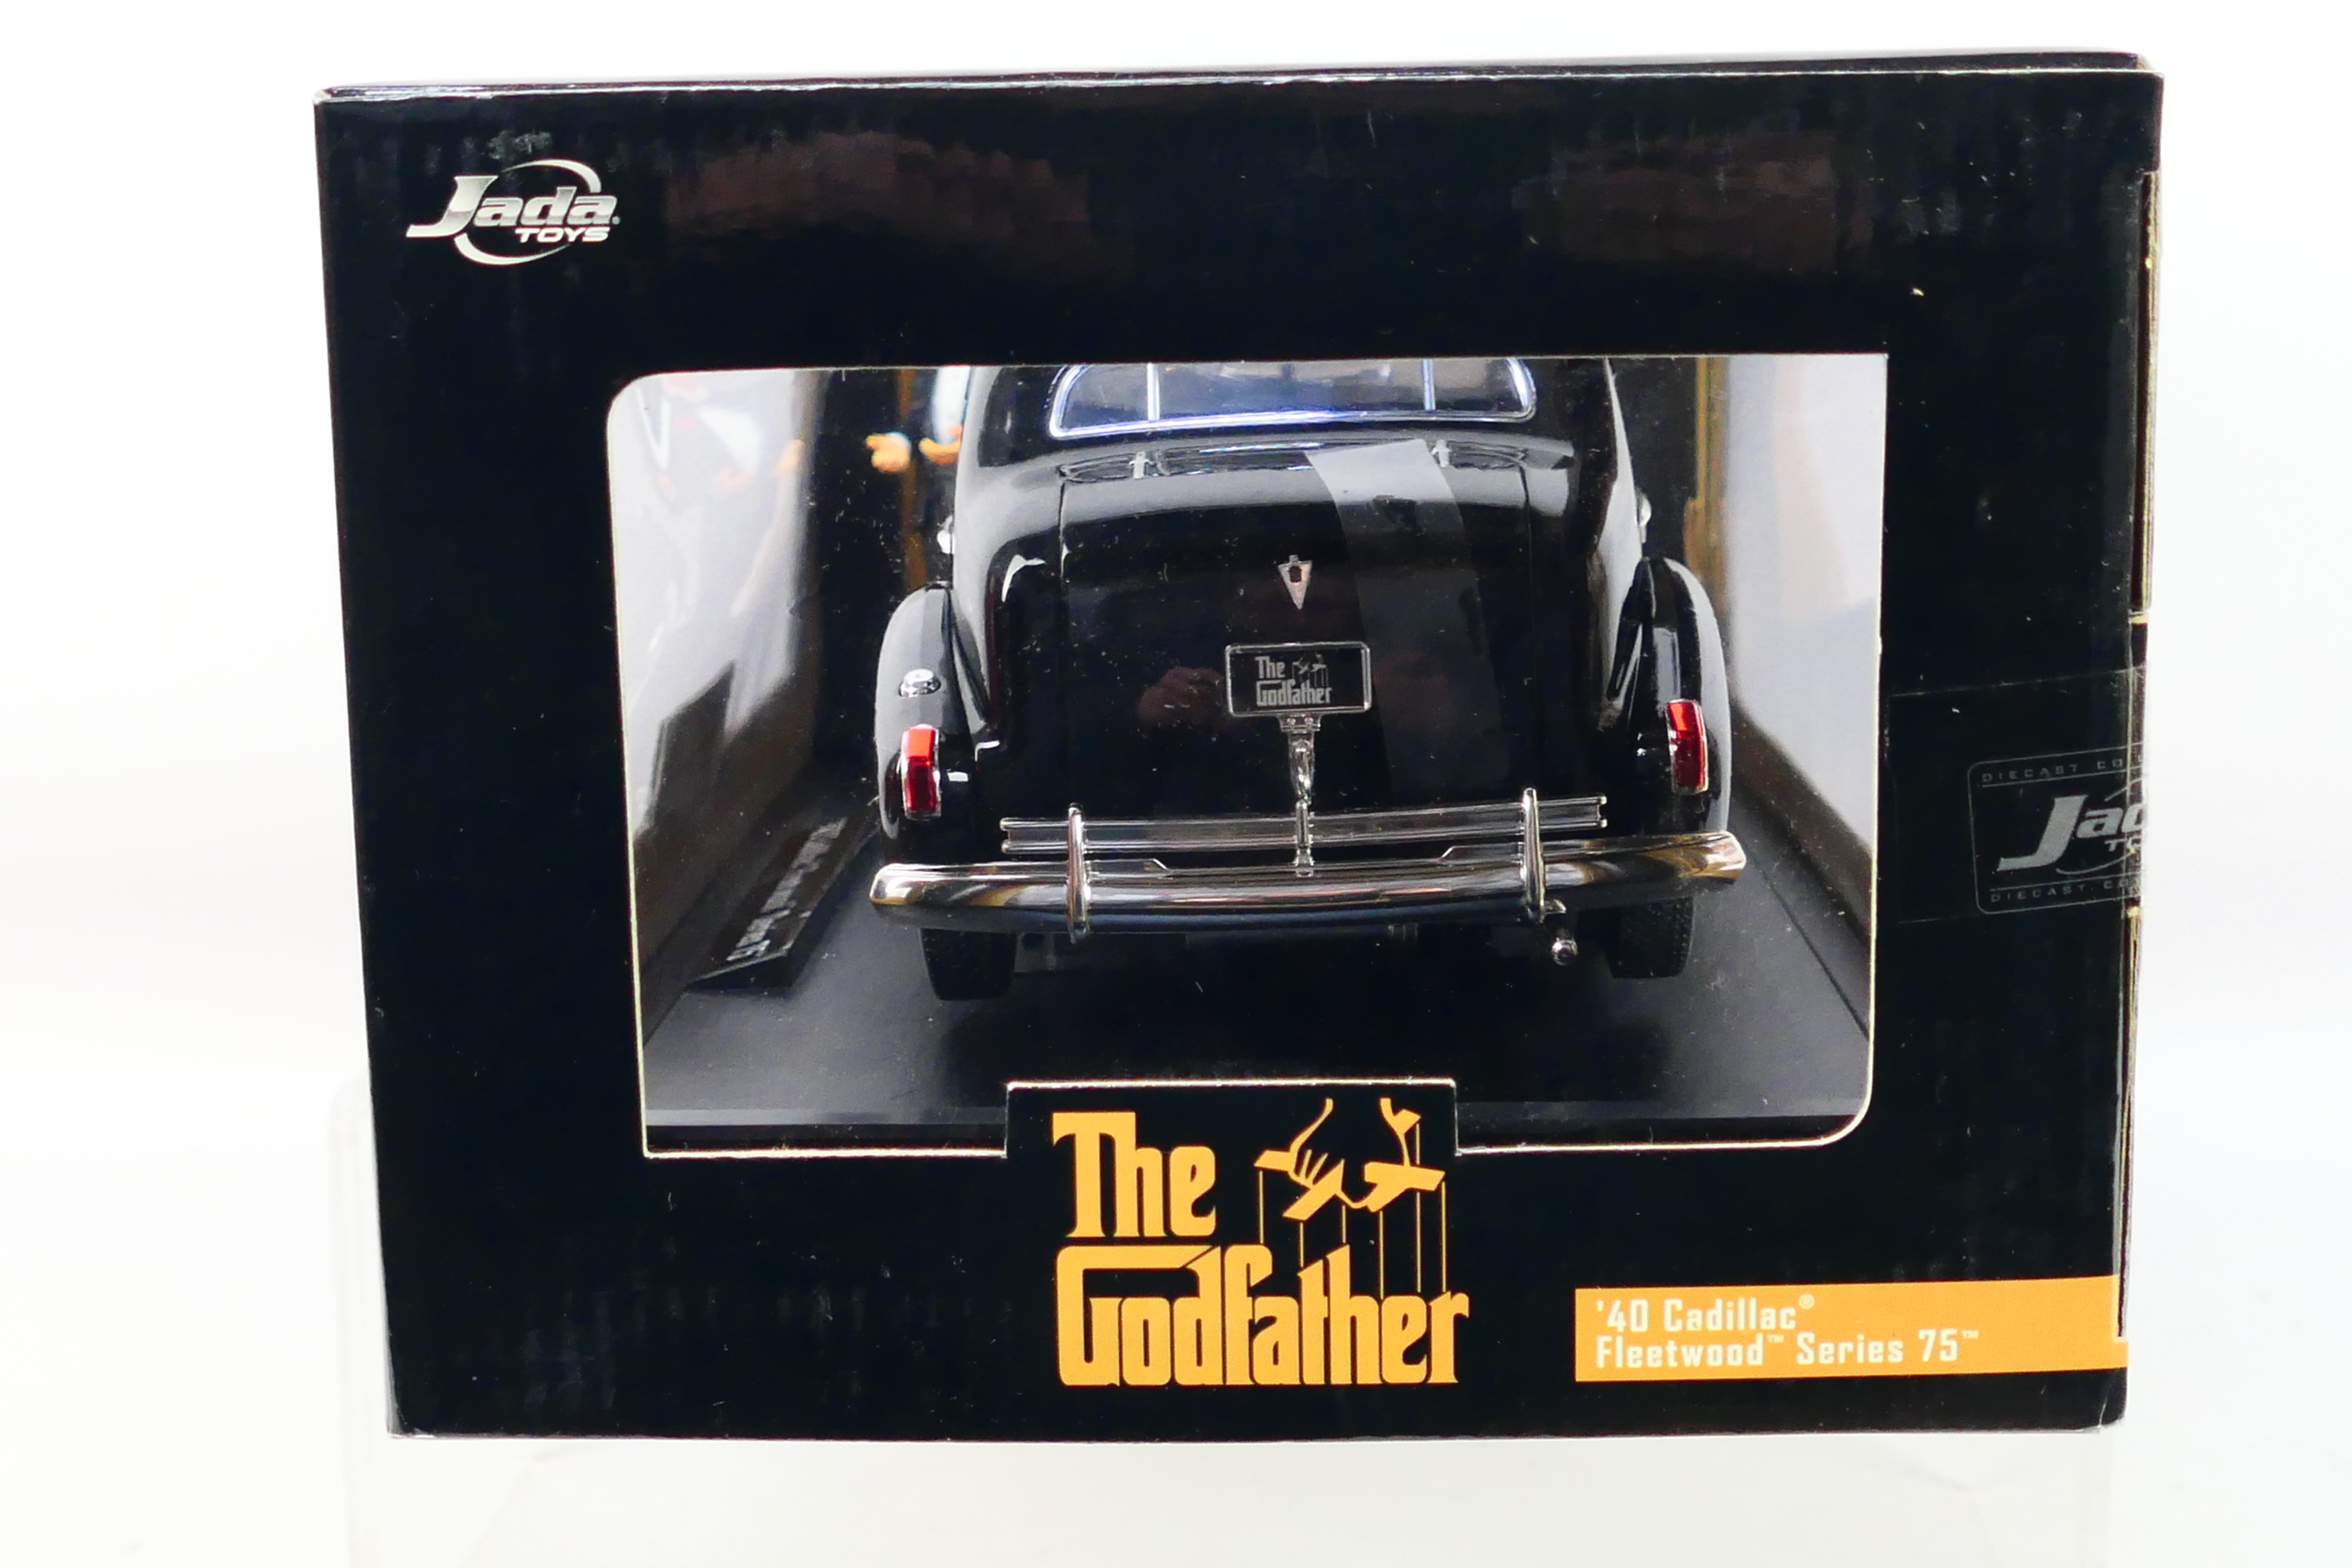 Jada Toys - A boxed 1:18 scale Jada Toys #91670 '40 Cadillac Fleetwood Series 75 from 'The - Image 6 of 7